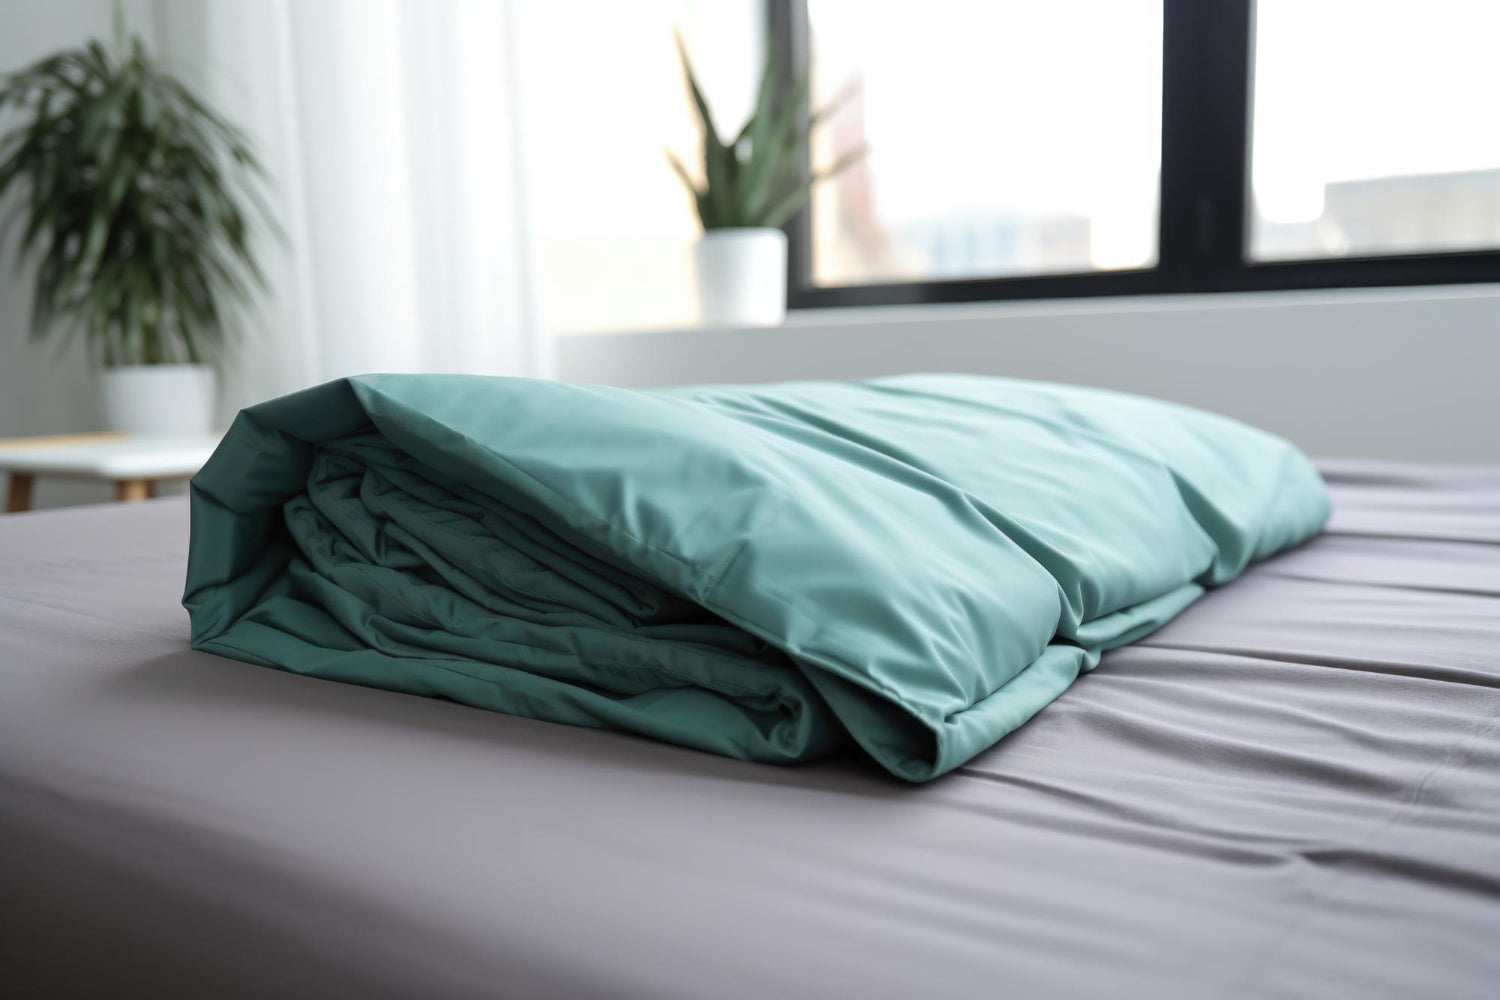 Flat Sheet vs Fitted Sheet - What's the Difference?